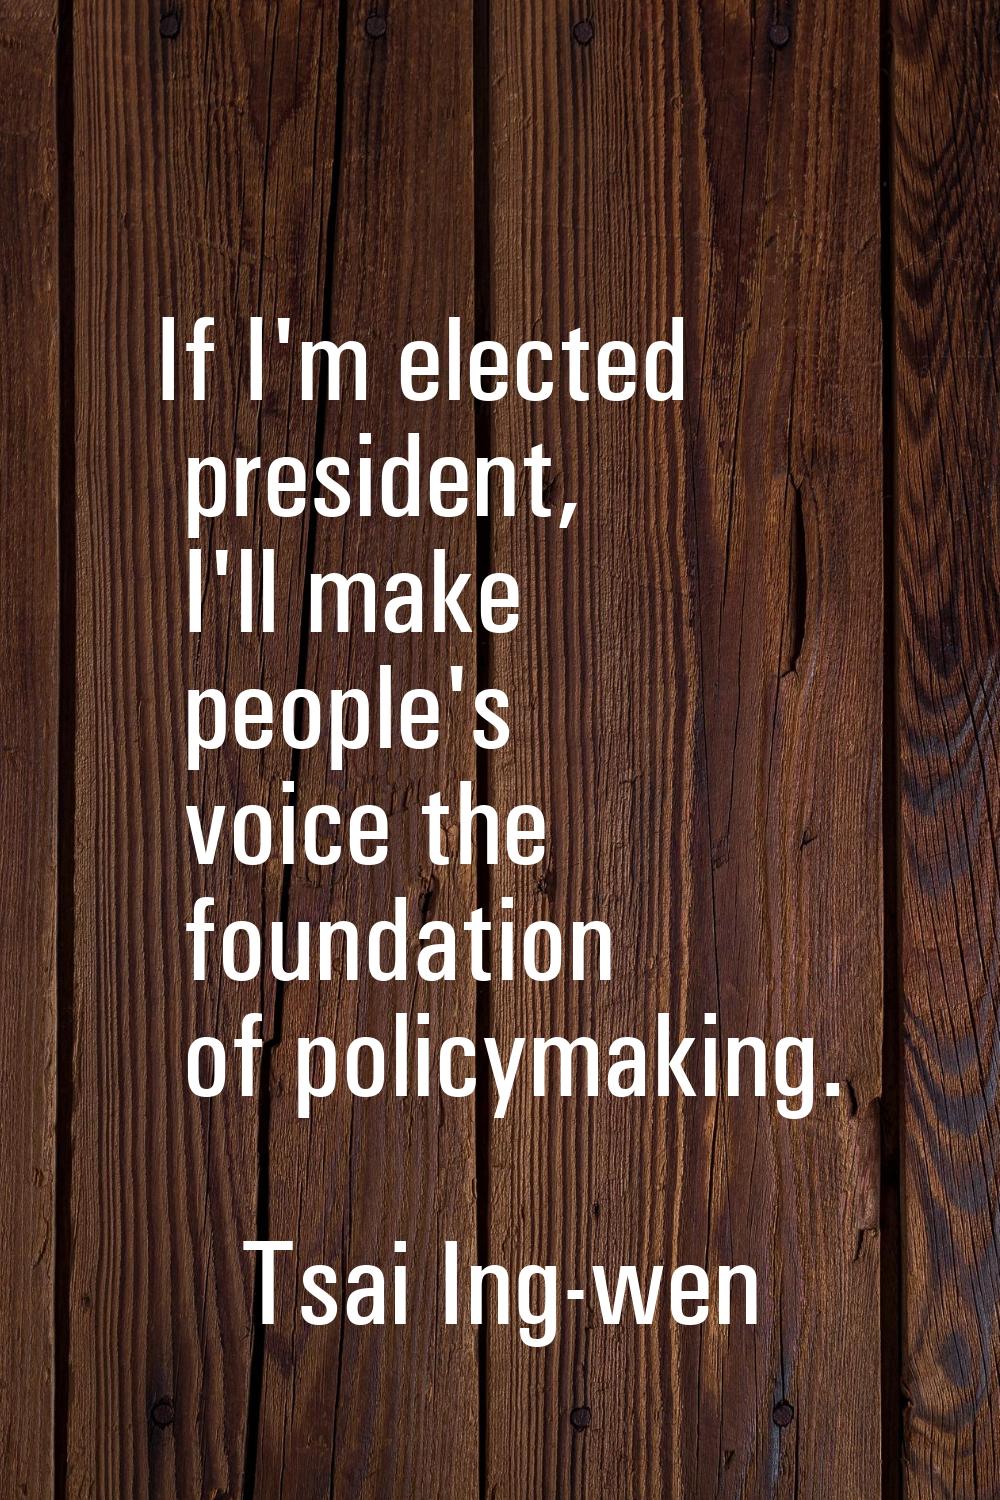 If I'm elected president, I'll make people's voice the foundation of policymaking.